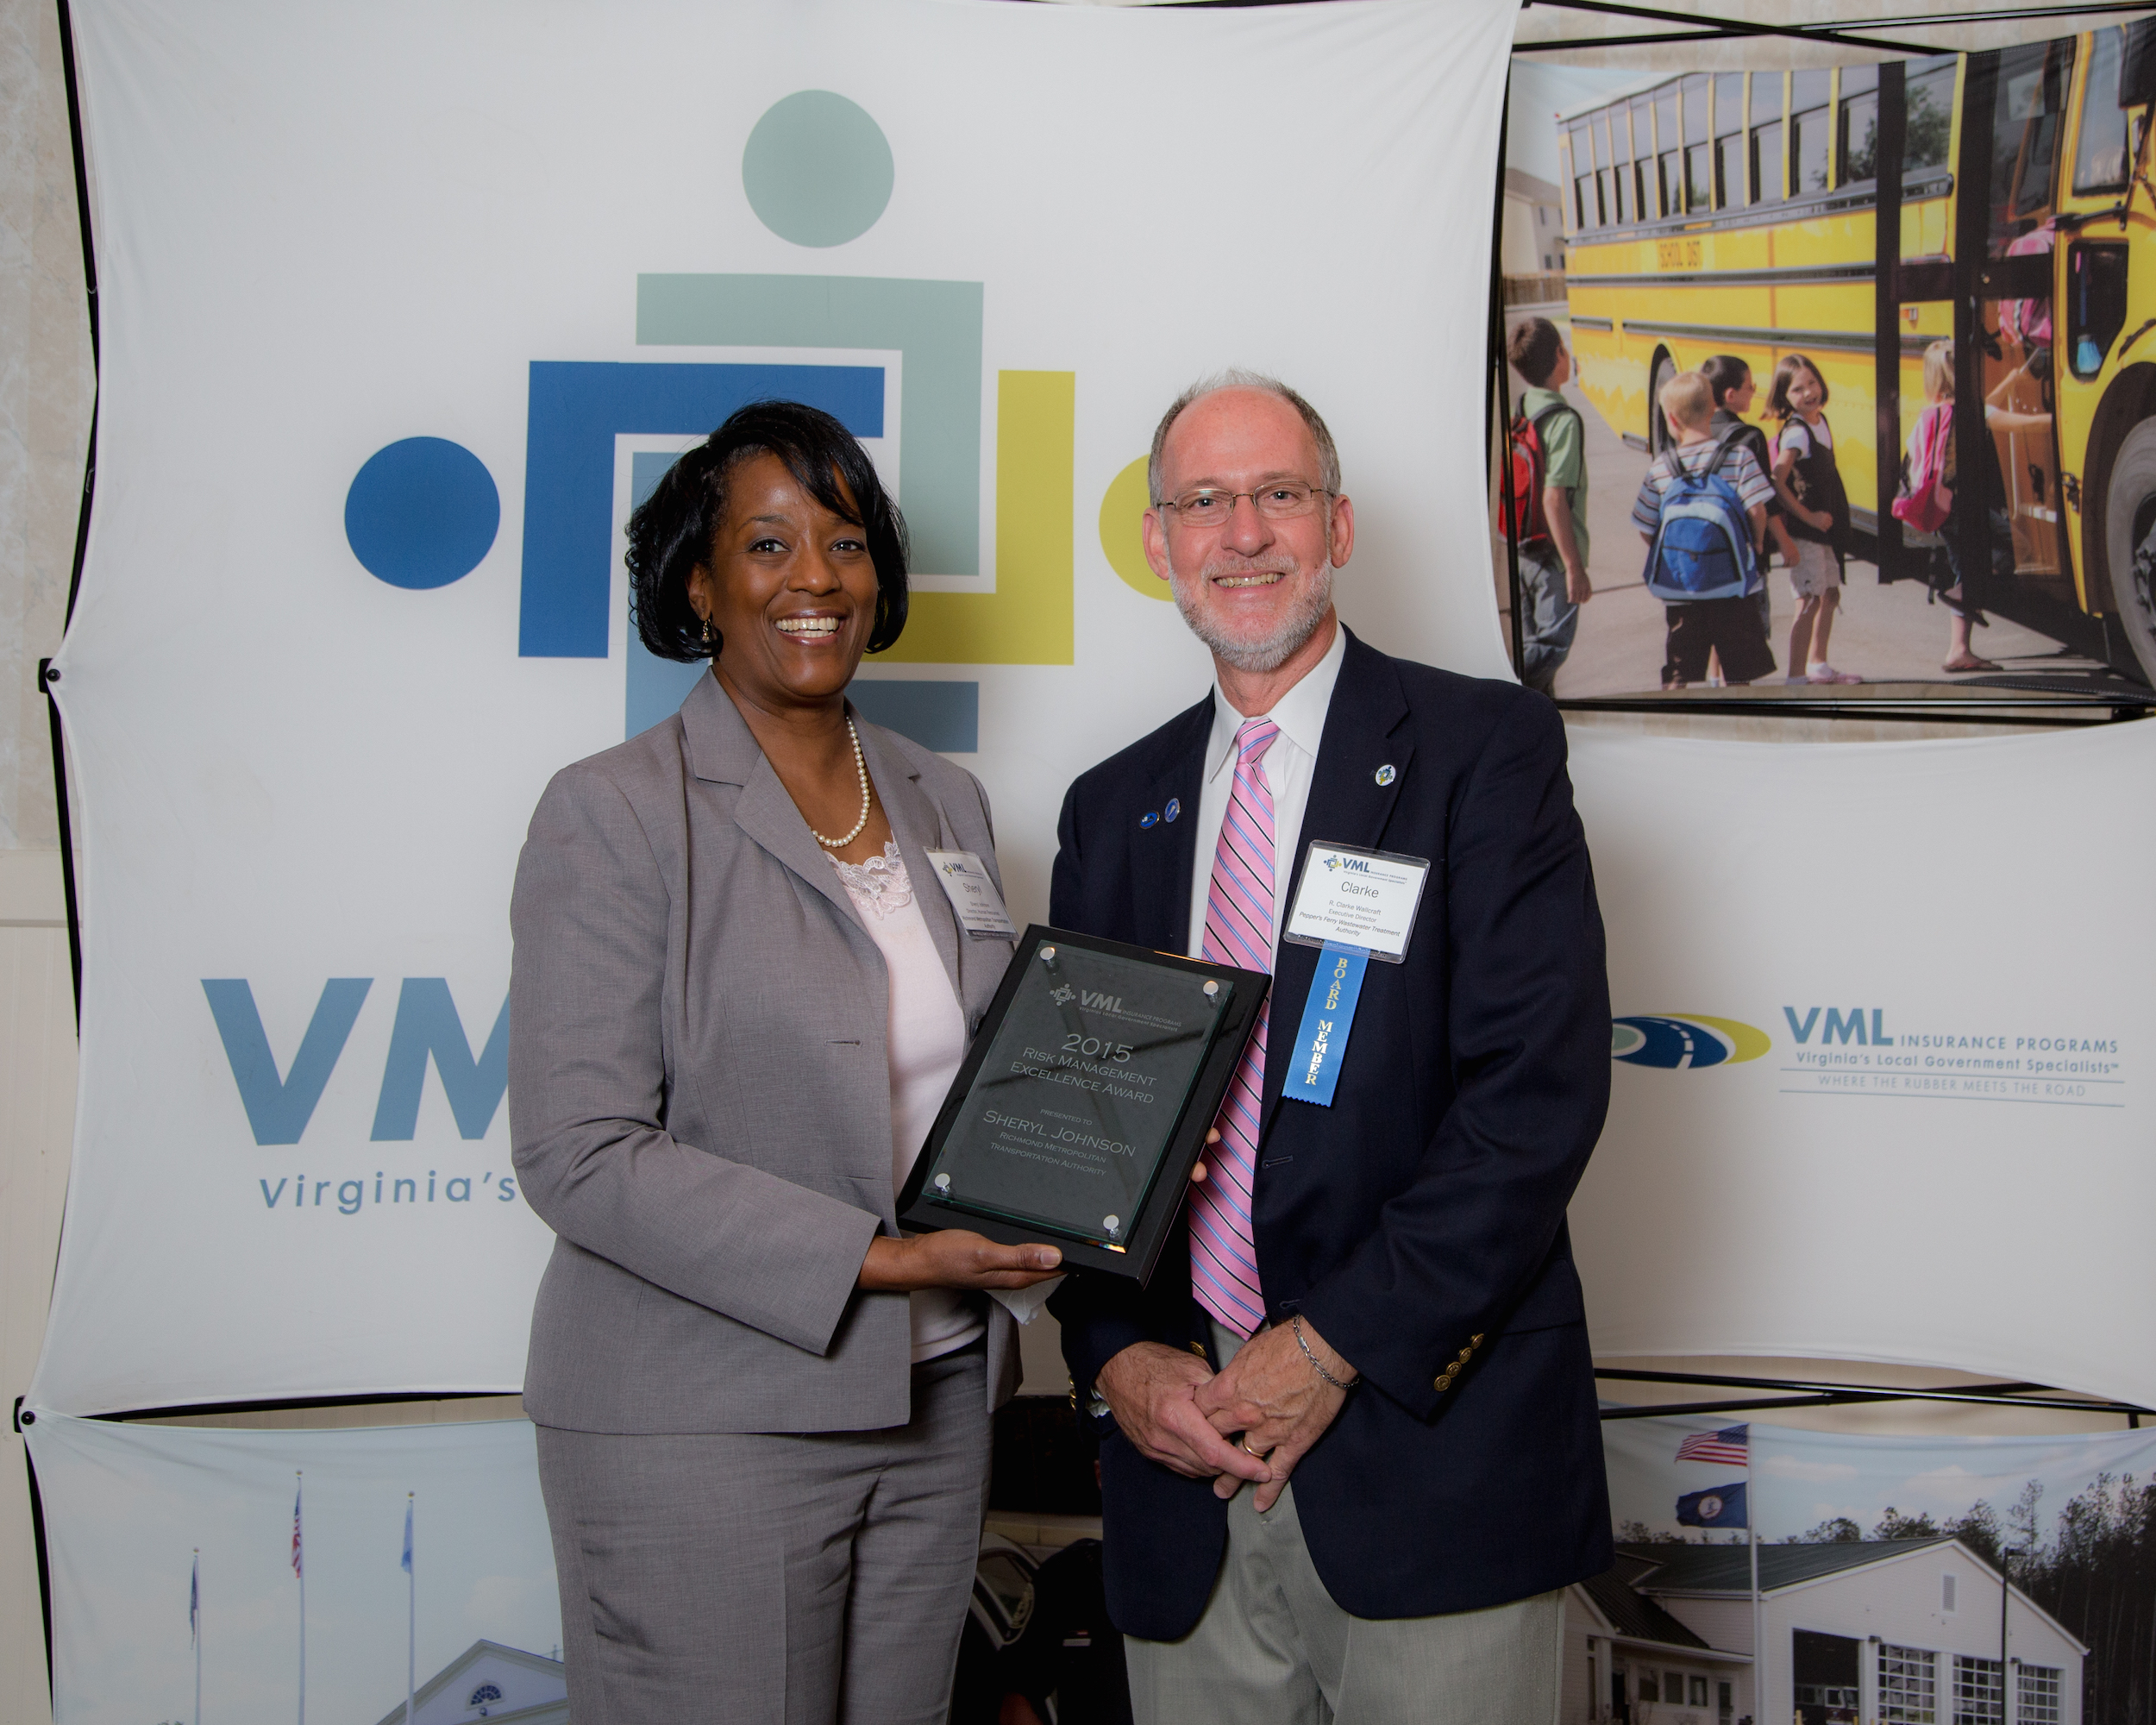 (L to R): Sheryl Johnson with the Richmond Metropolitan Transit Authority and VMLIP Members’ Supervisory Board Member Clarke Wallcraft